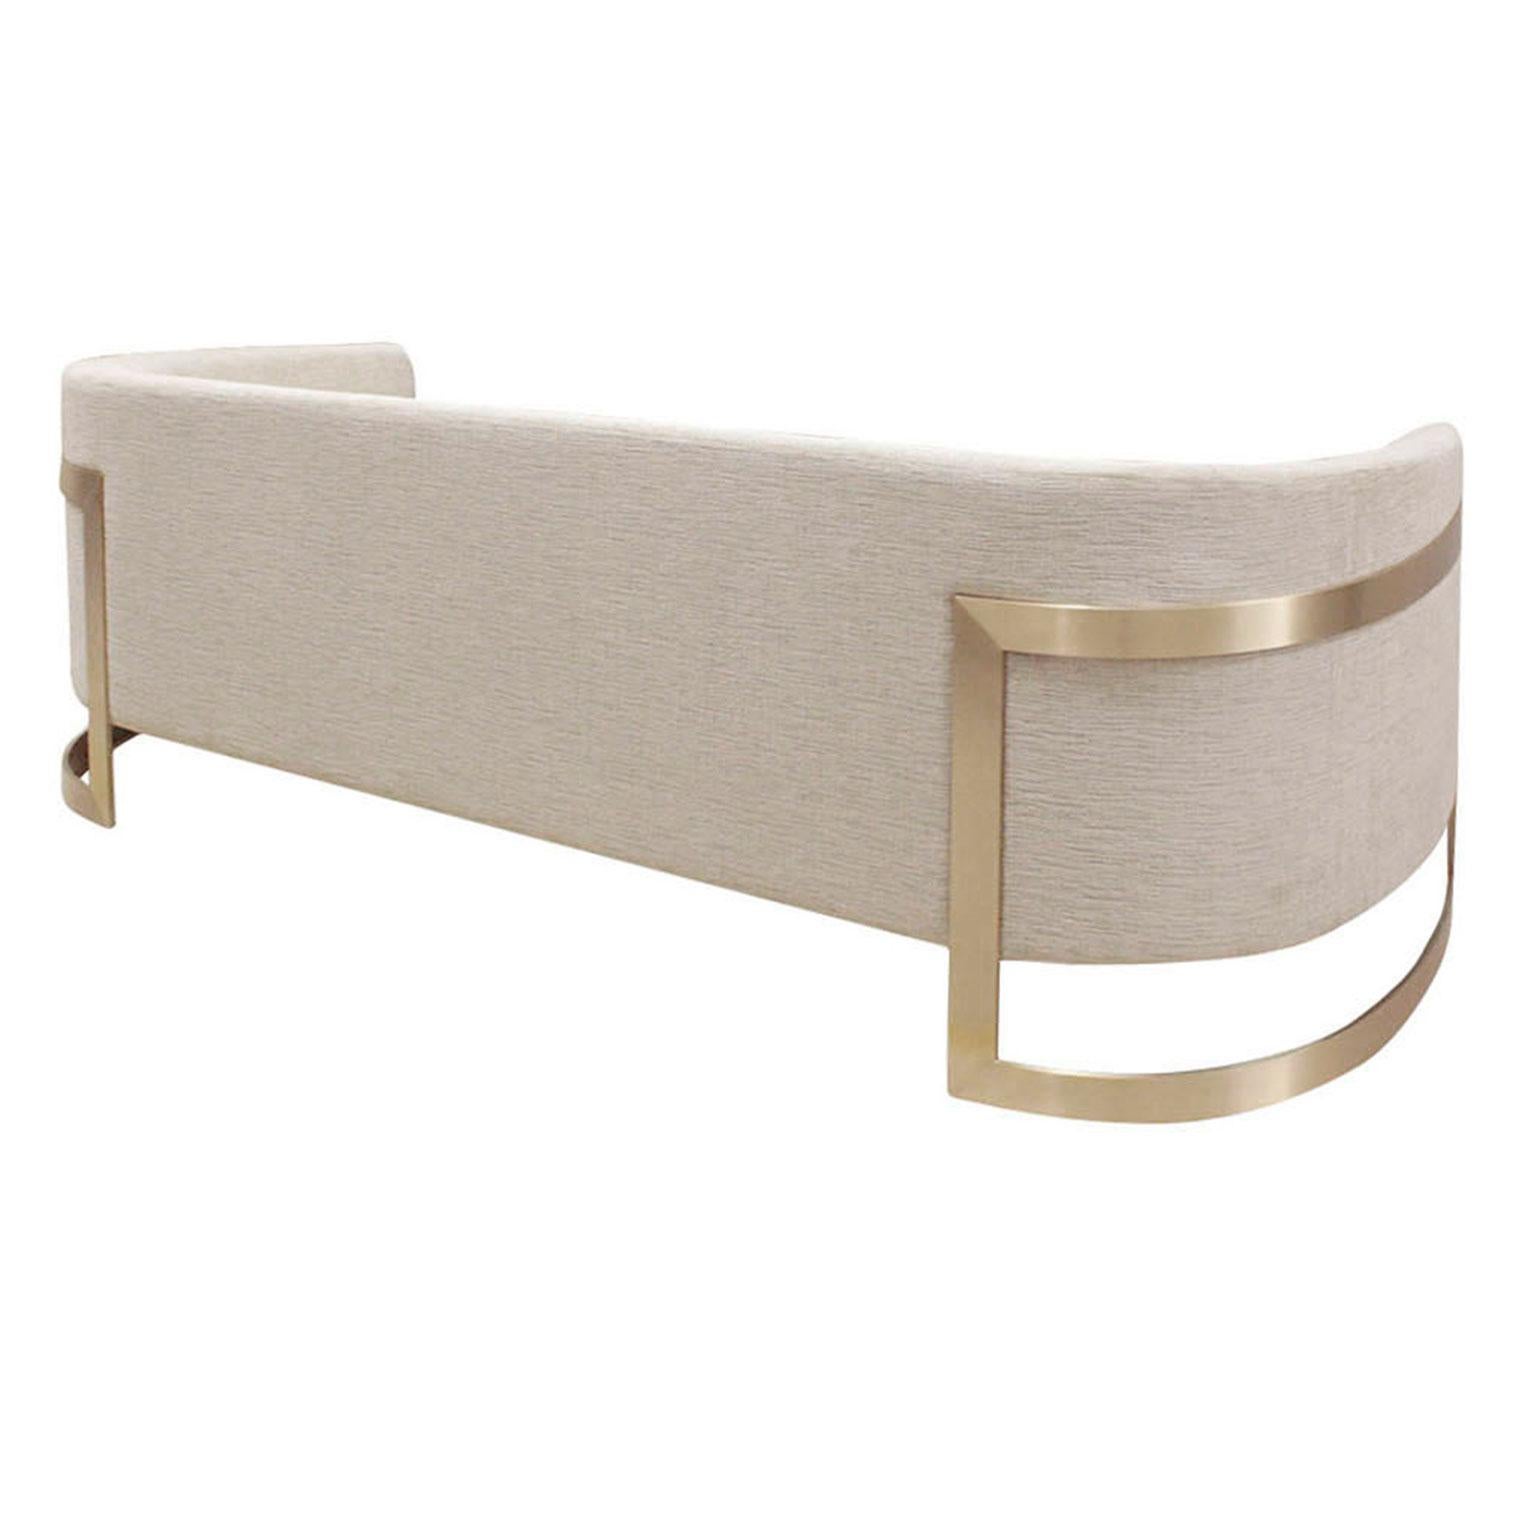 The contemporary sofa features a curved back and sleek metal frame. The upholstered body has a single seat cushion with three back cushions for comfort. The legs, shown in a brushed brass finish, wrap up and around the sides, supporting the